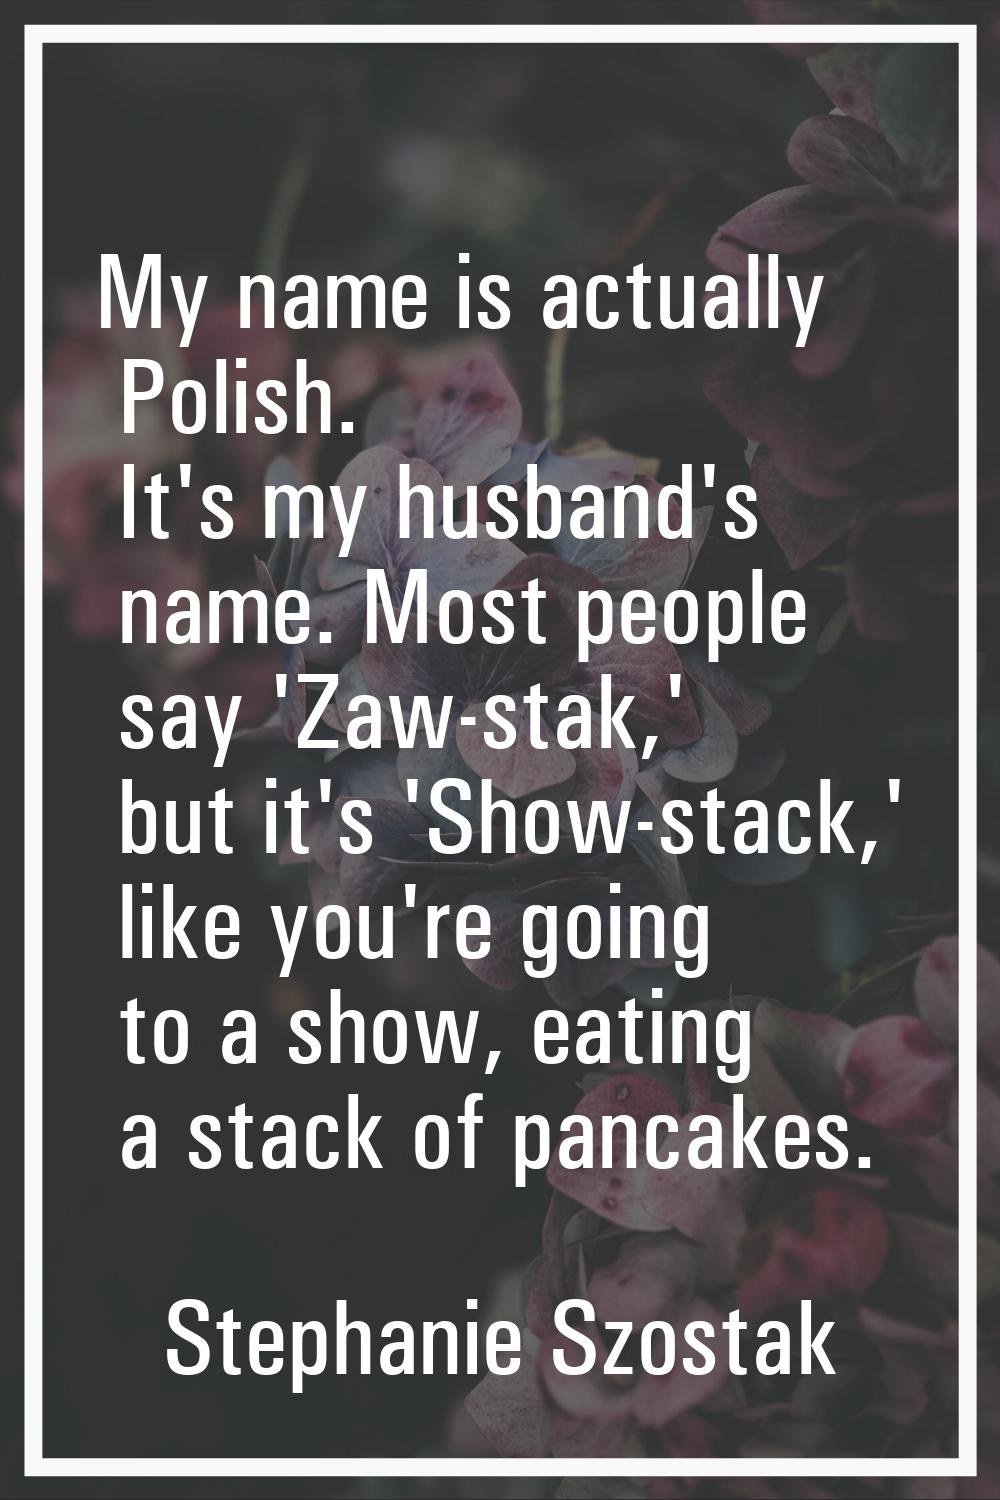 My name is actually Polish. It's my husband's name. Most people say 'Zaw-stak,' but it's 'Show-stac